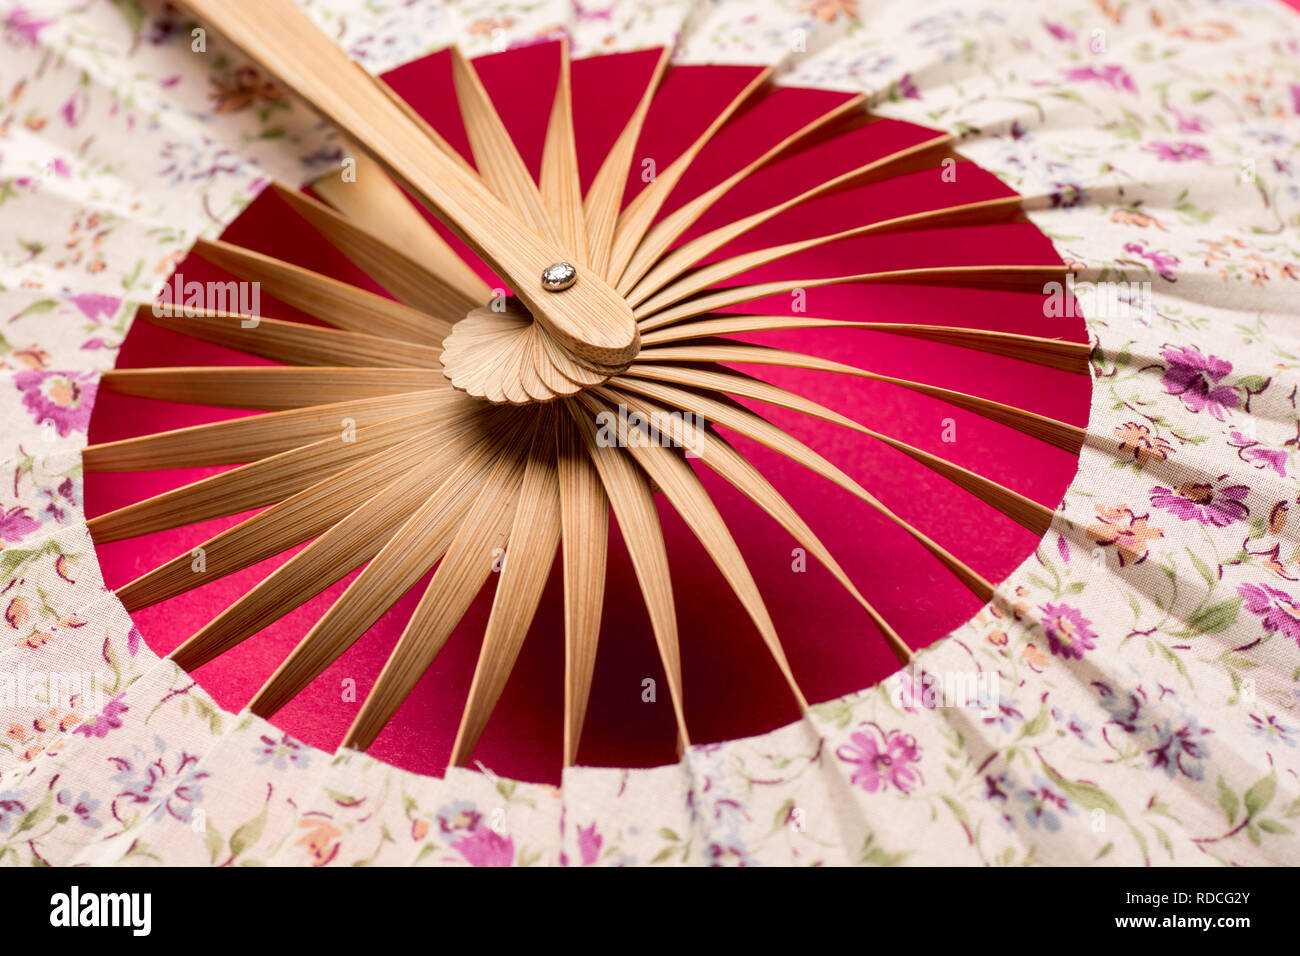 Traditional fan with far eastern motive on red background close up Stock Photo